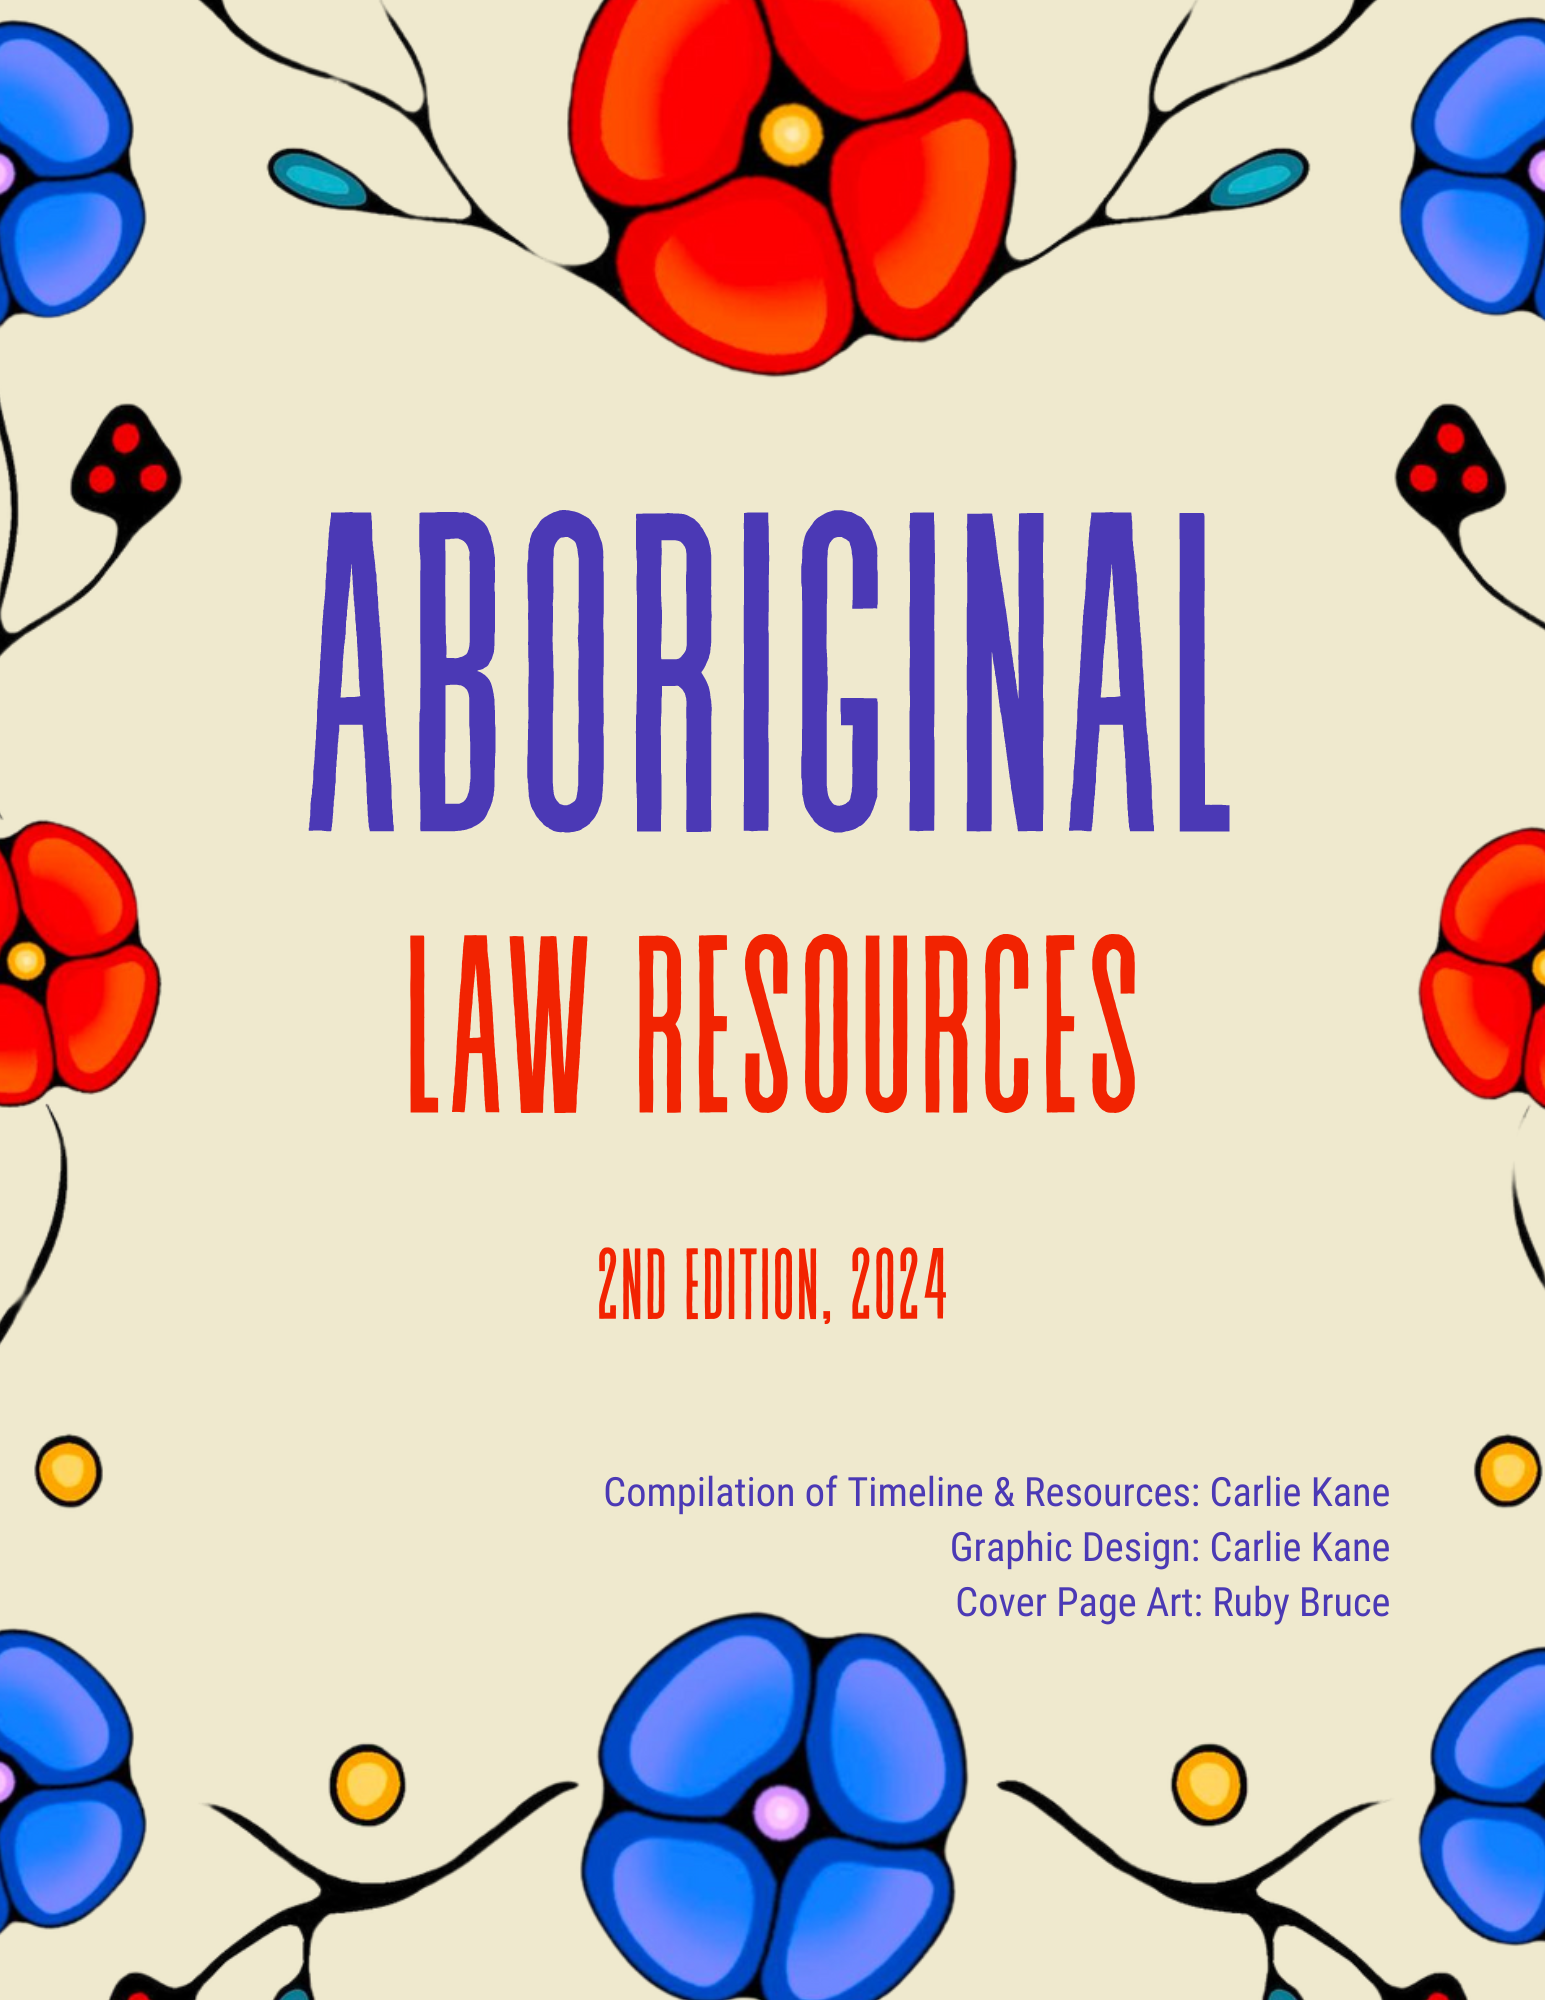 Cover page from the 2nd Ed. of the Aboriginal Law Resources document